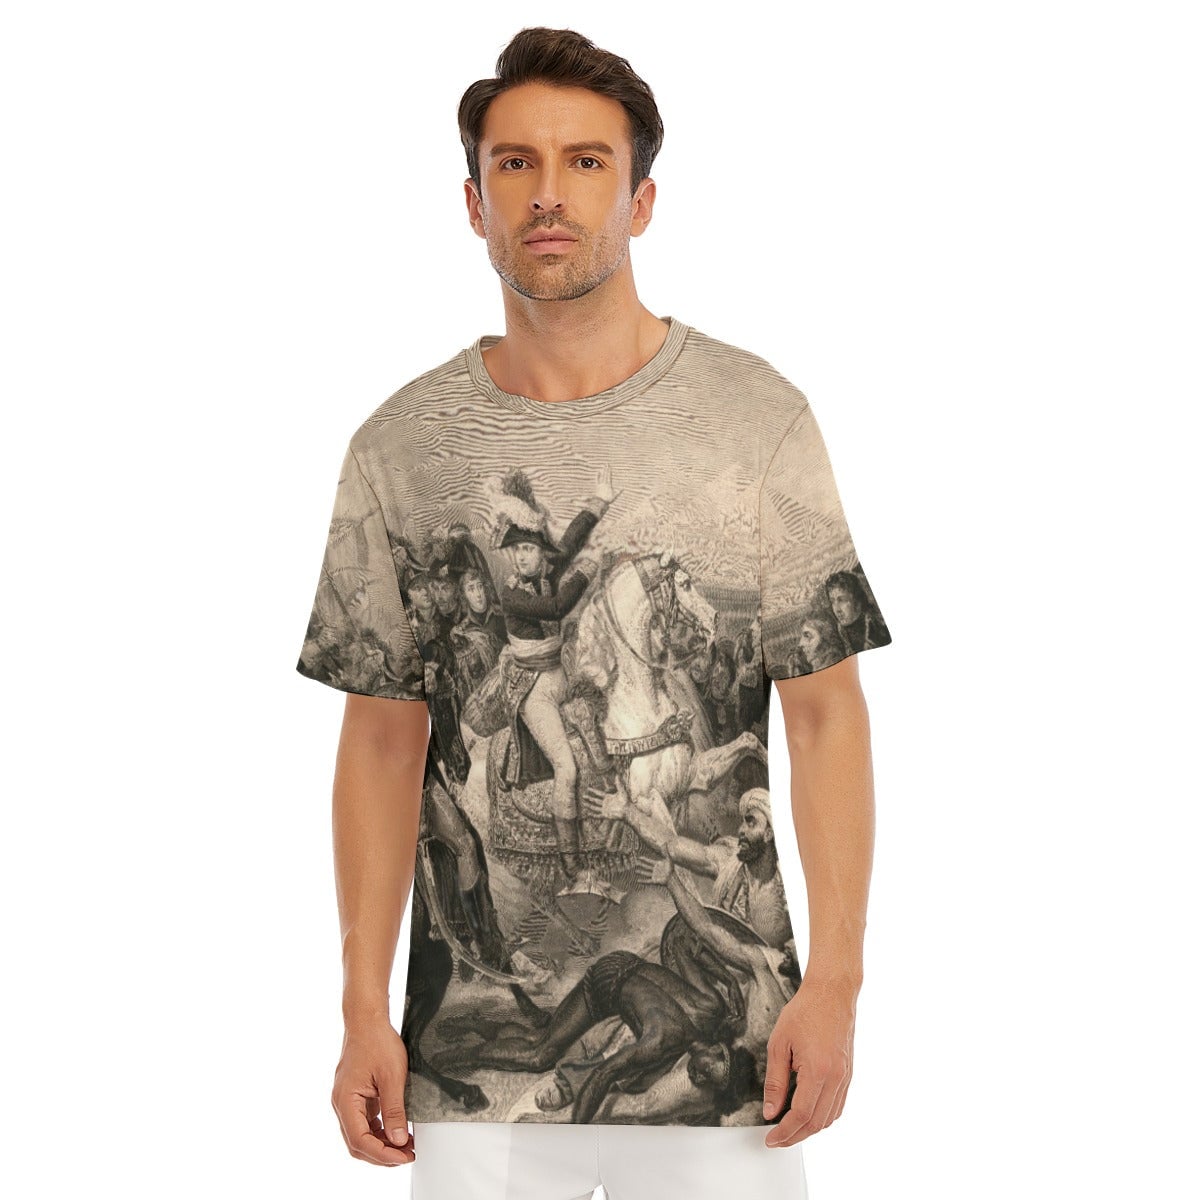 Napoleon at The Battle of The Pyramids T-Shirt